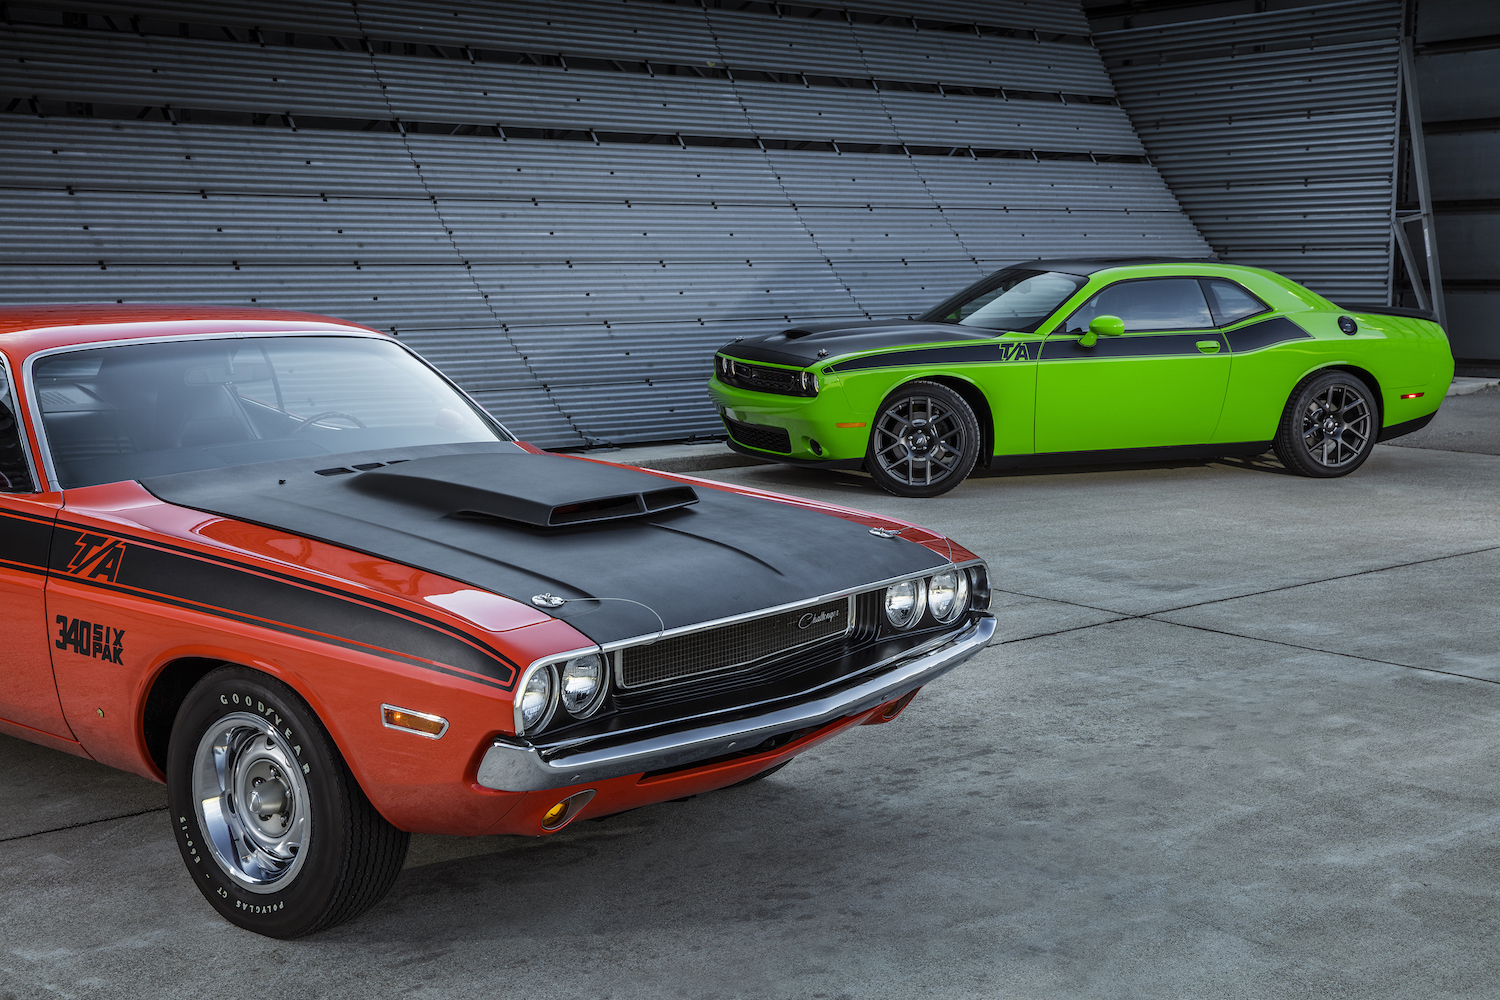 A red vintage Dodge Challenger is parked next to a new, green version of the T/A trim for a promo photo.